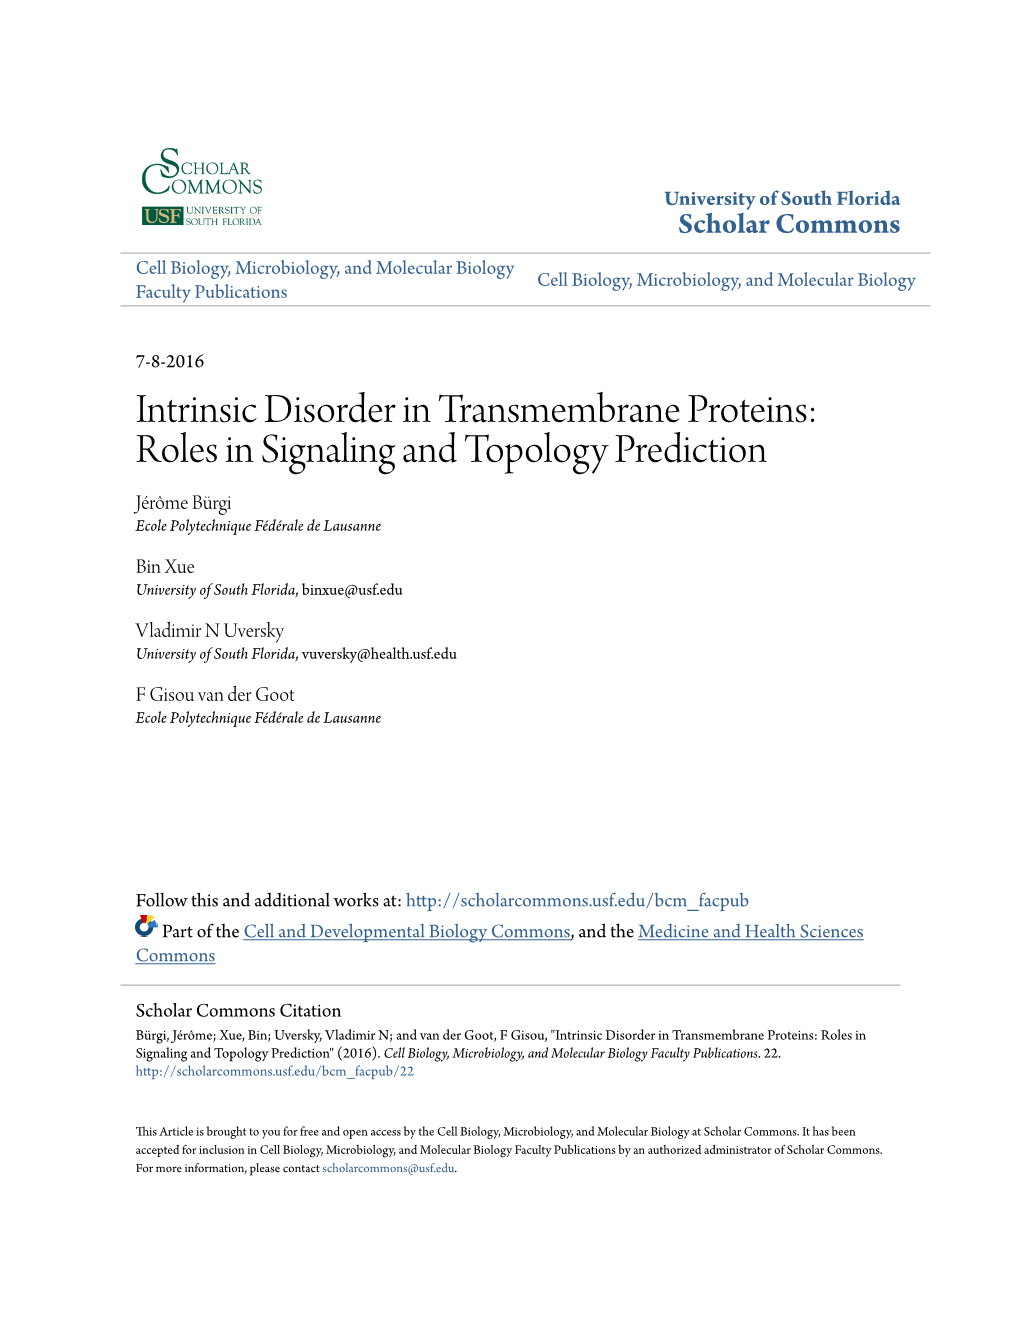 Intrinsic Disorder in Transmembrane Proteins: Roles in Signaling and Topology Prediction Jérôme Bürgi Ecole Polytechnique Fédérale De Lausanne